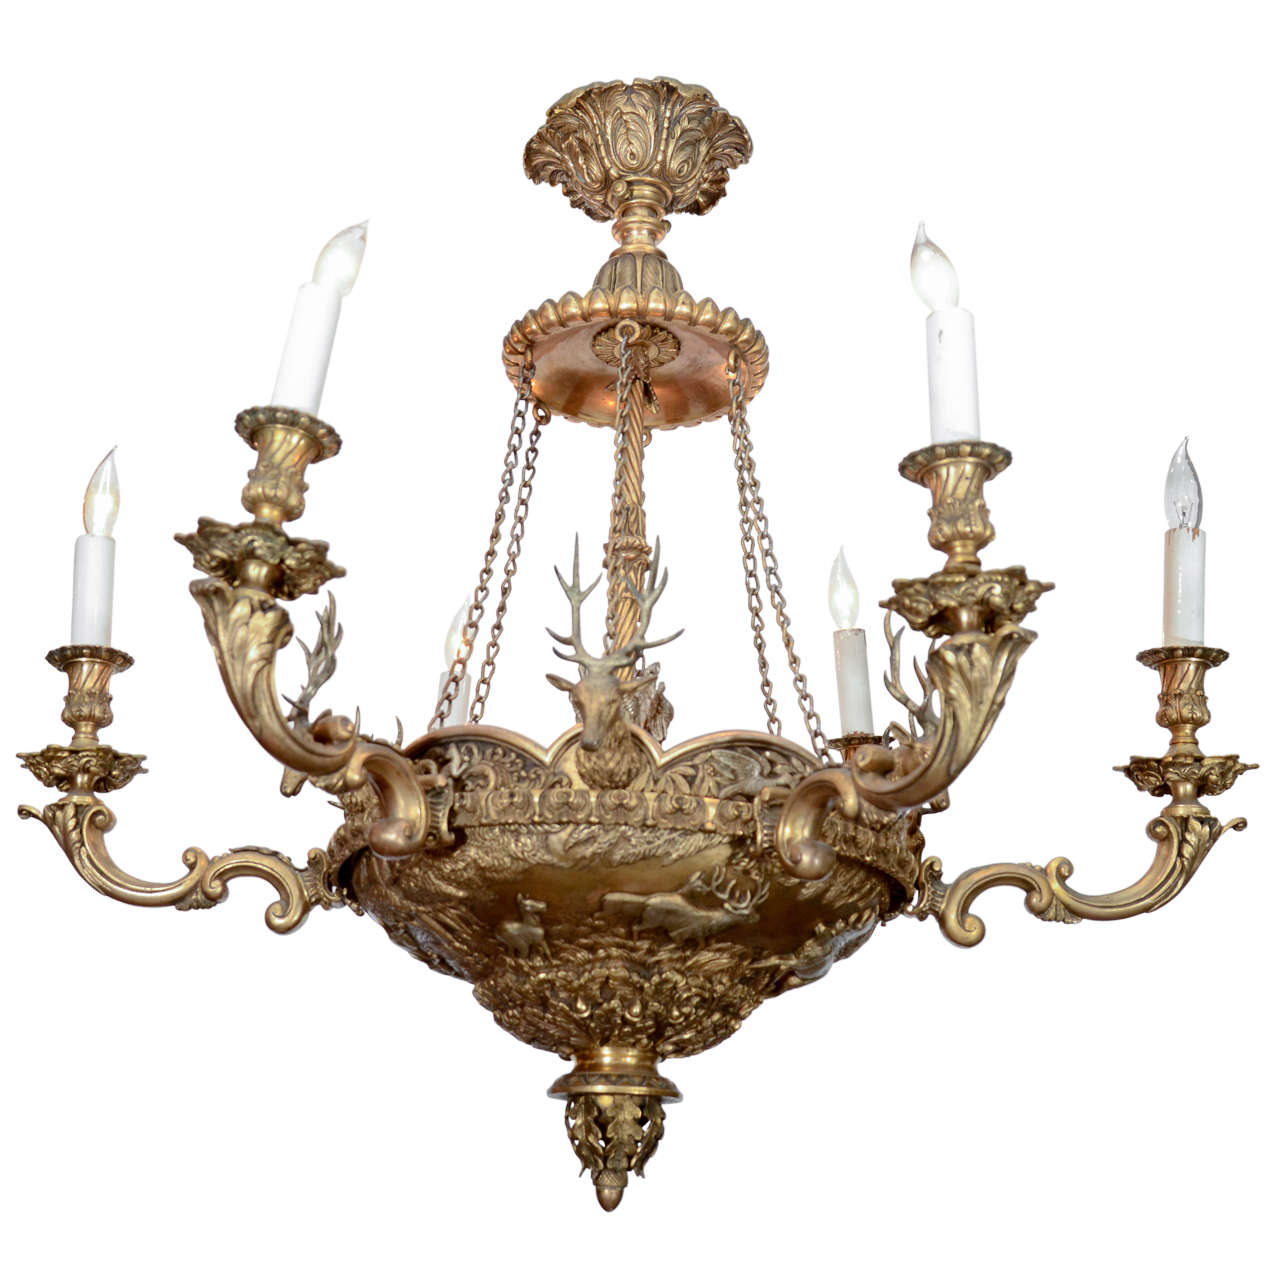 French Dore Bronze Six Light Chandelier with Stags and Swans from ...